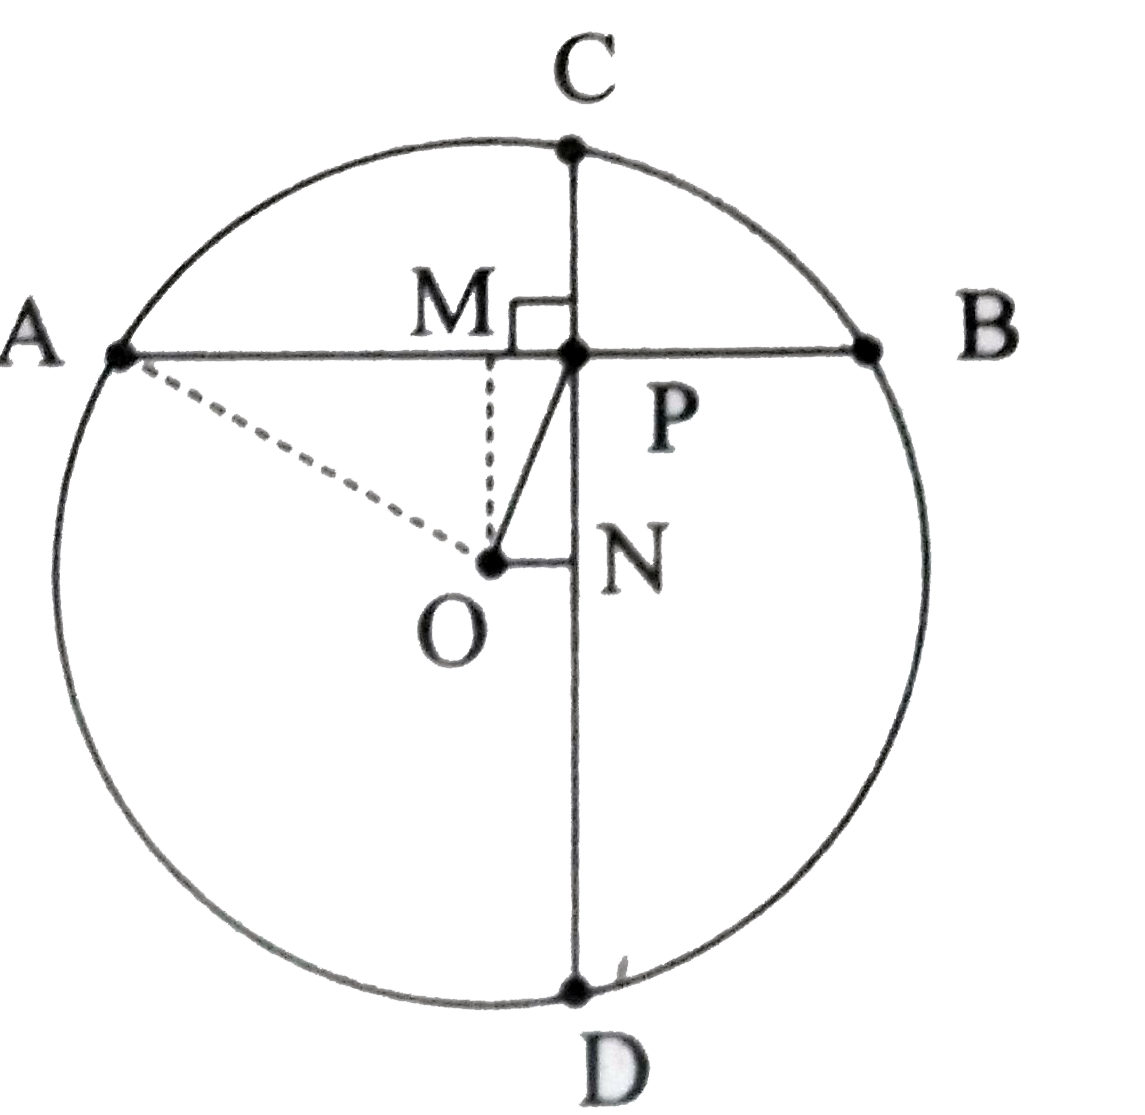 A school wants to conduct tree plantation programme. For this a teacher allotted a circle of radius 6m ground to nineth standard students for plating sapplings. Four students plant trees at the points A,B,C and D as shown in figure. Here AB = 8m, CD = 10 m and AB bot CD. If another student places a flower pot at the point P, the intersection of AB and CD, then find the distance from the centre to P.